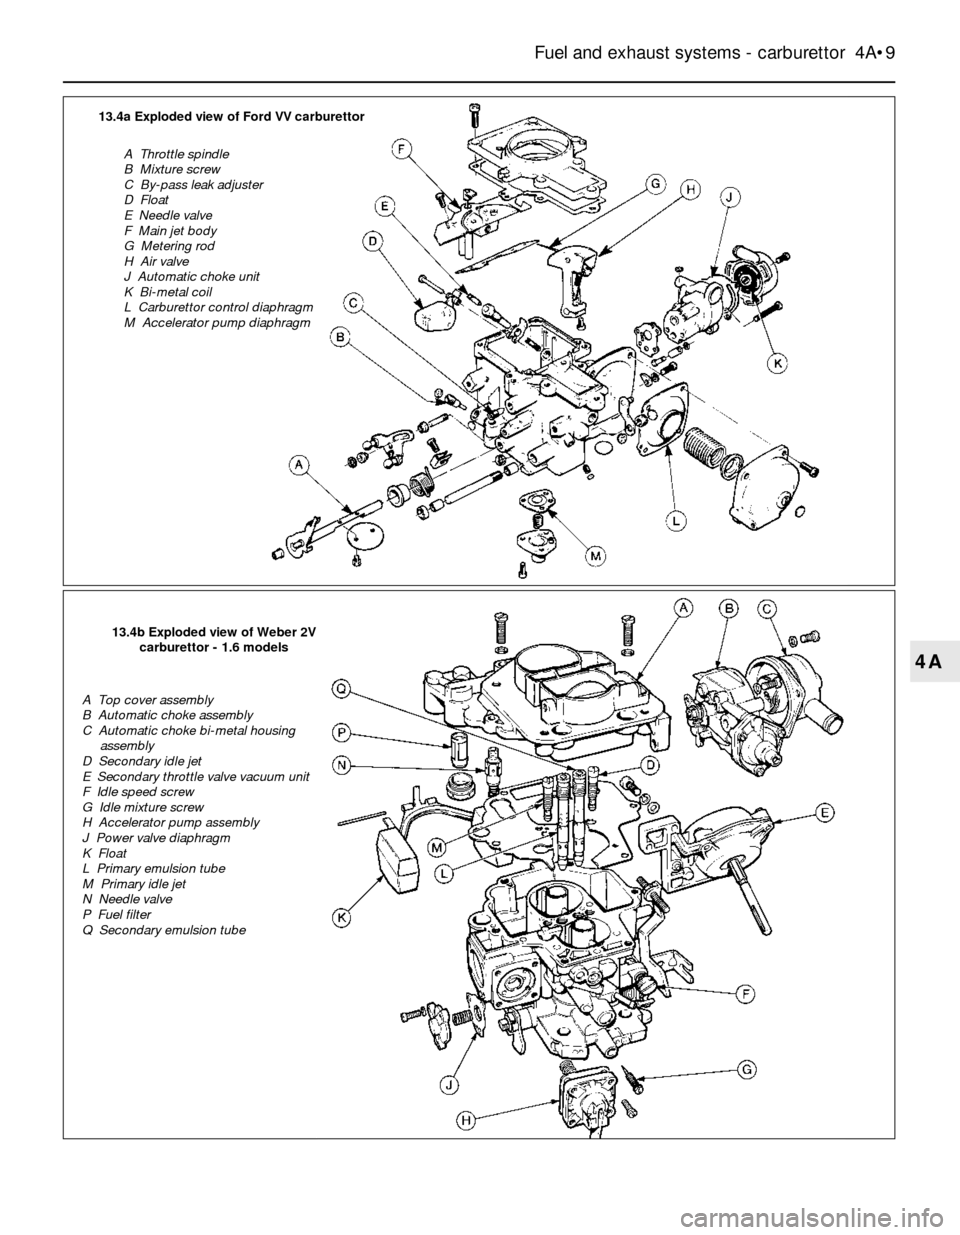 FORD SIERRA 1986 1.G Fuel And Exhaust Systems Carburettor Workshop Manual Fuel and exhaust systems - carburettor  4A•9
4A
13.4a Exploded view of Ford VV carburettor
A  Throttle spindle
B  Mixture screw
C  By-pass leak adjuster
D  Float
E  Needle valve
F  Main jet body
G  